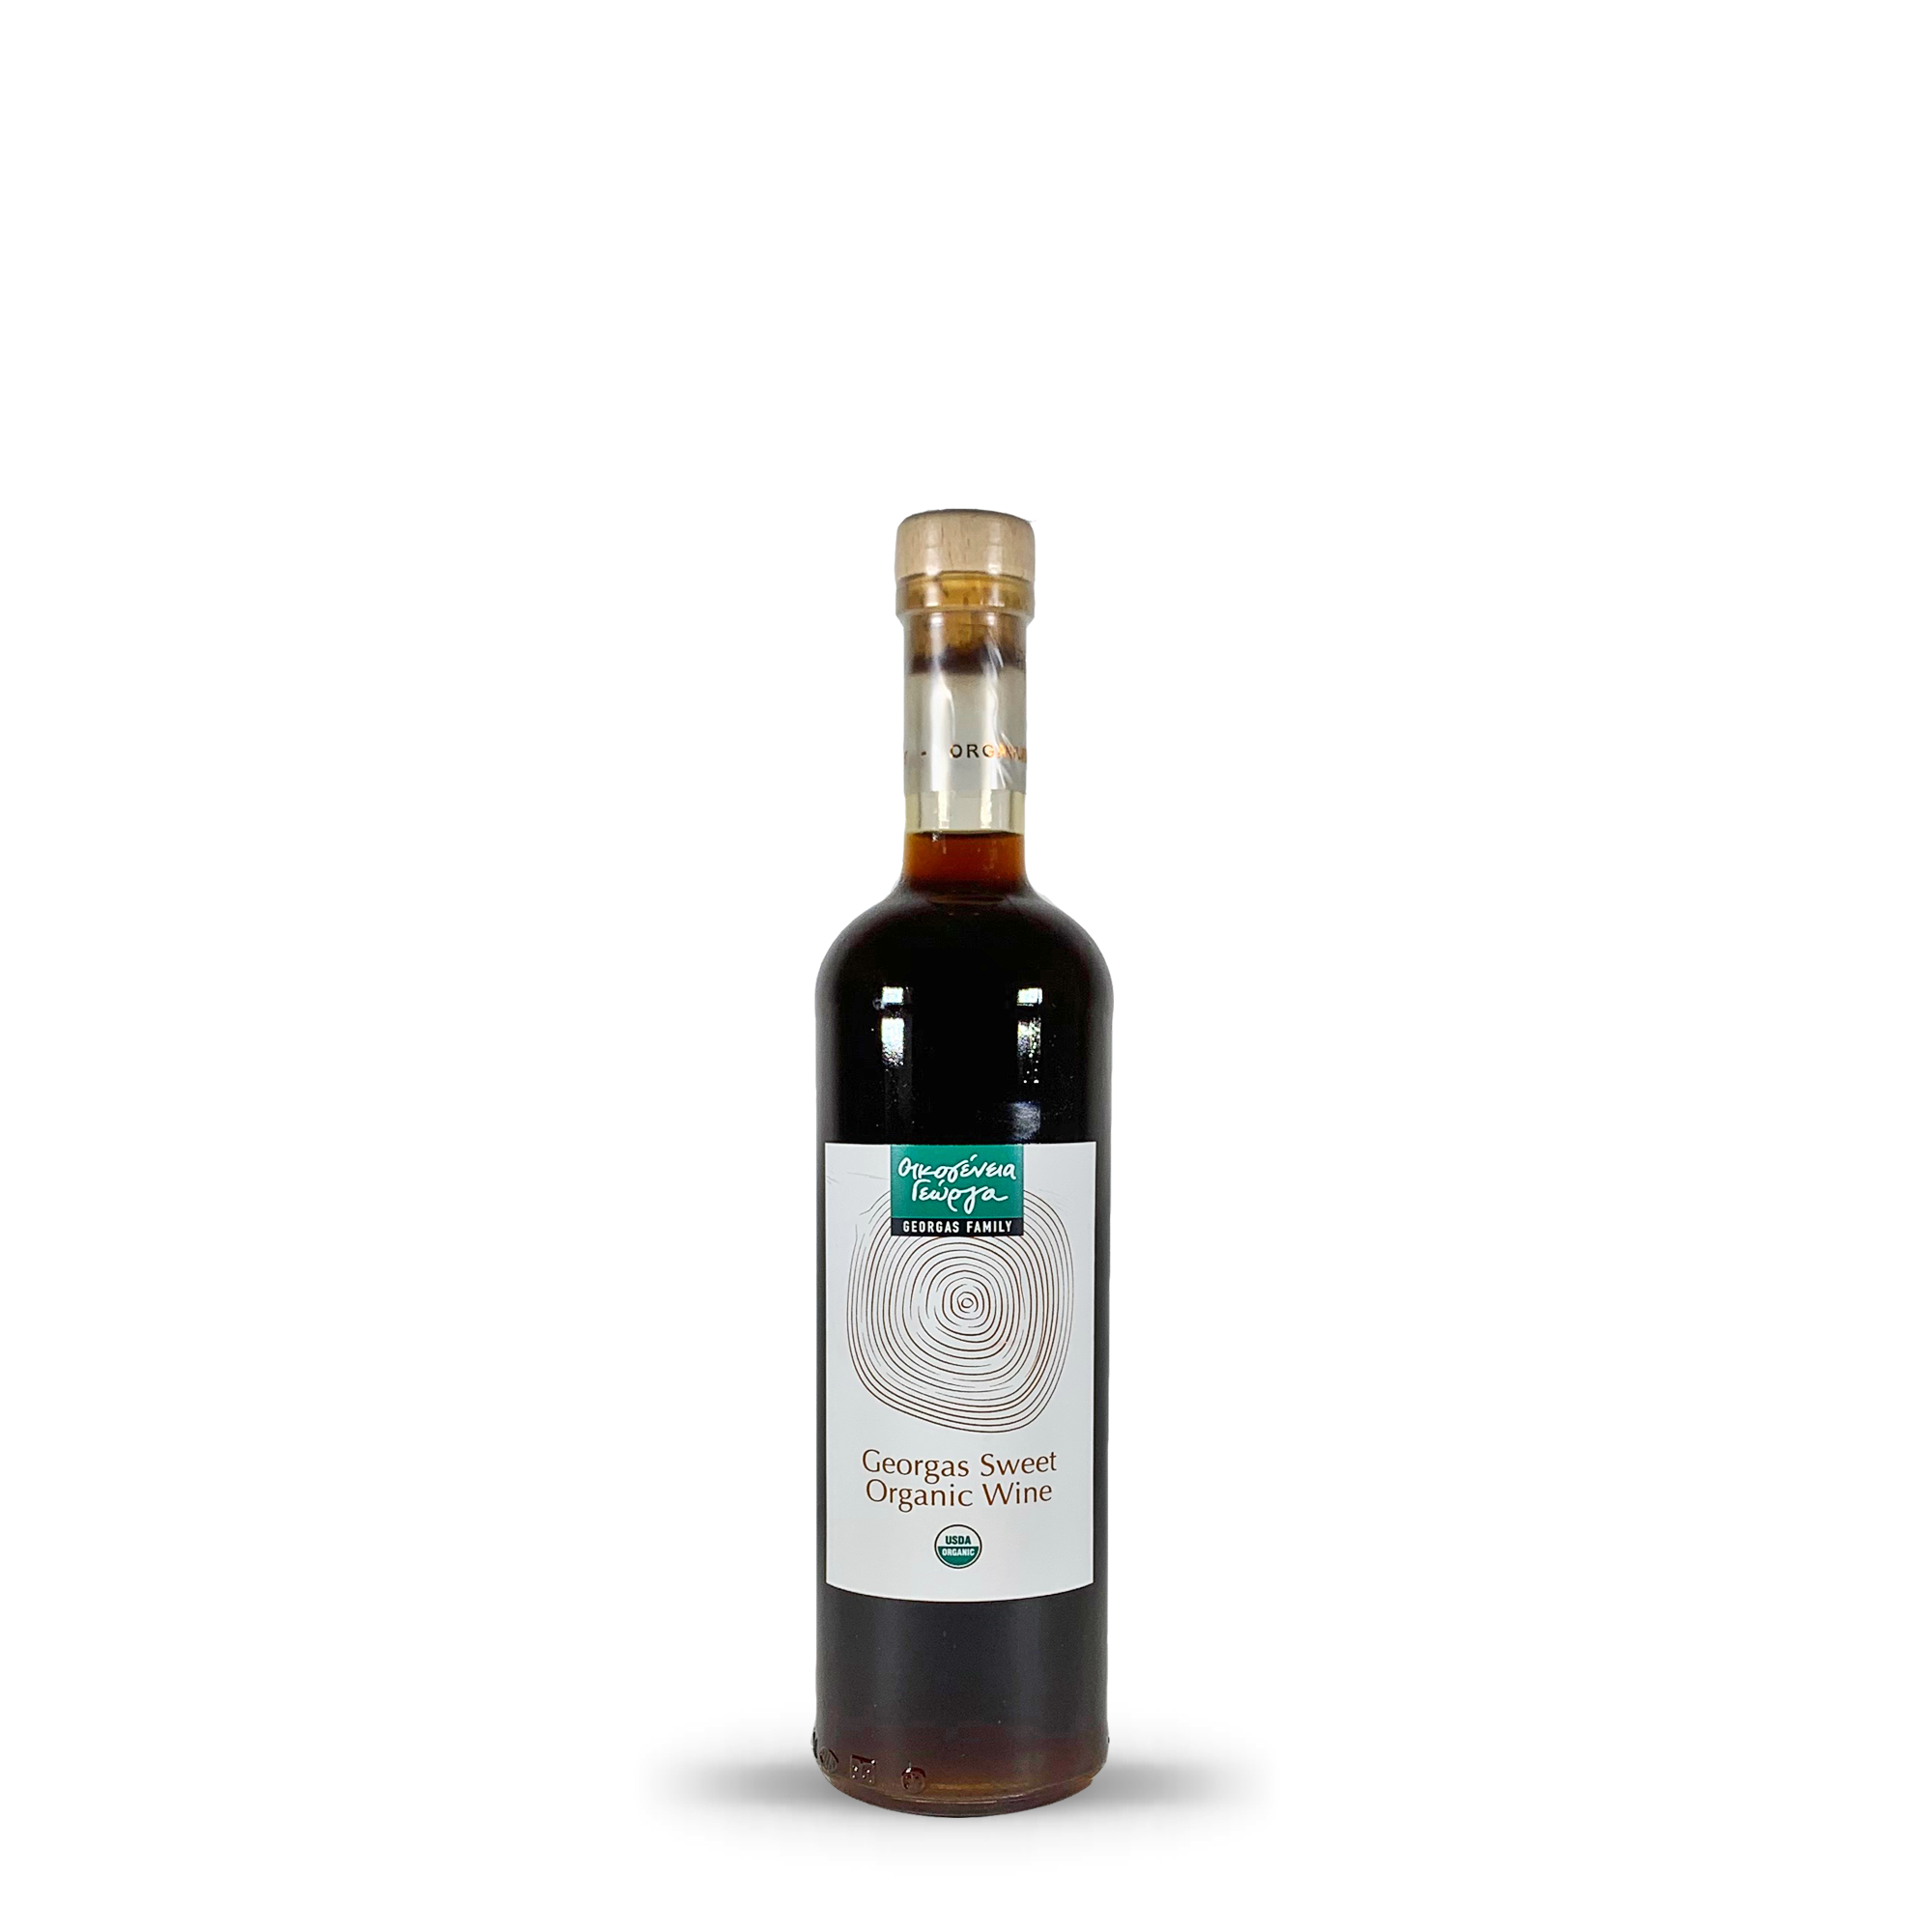 Aged Sweet White Wine NV - Georgas Family - Spata, Greece 50cl